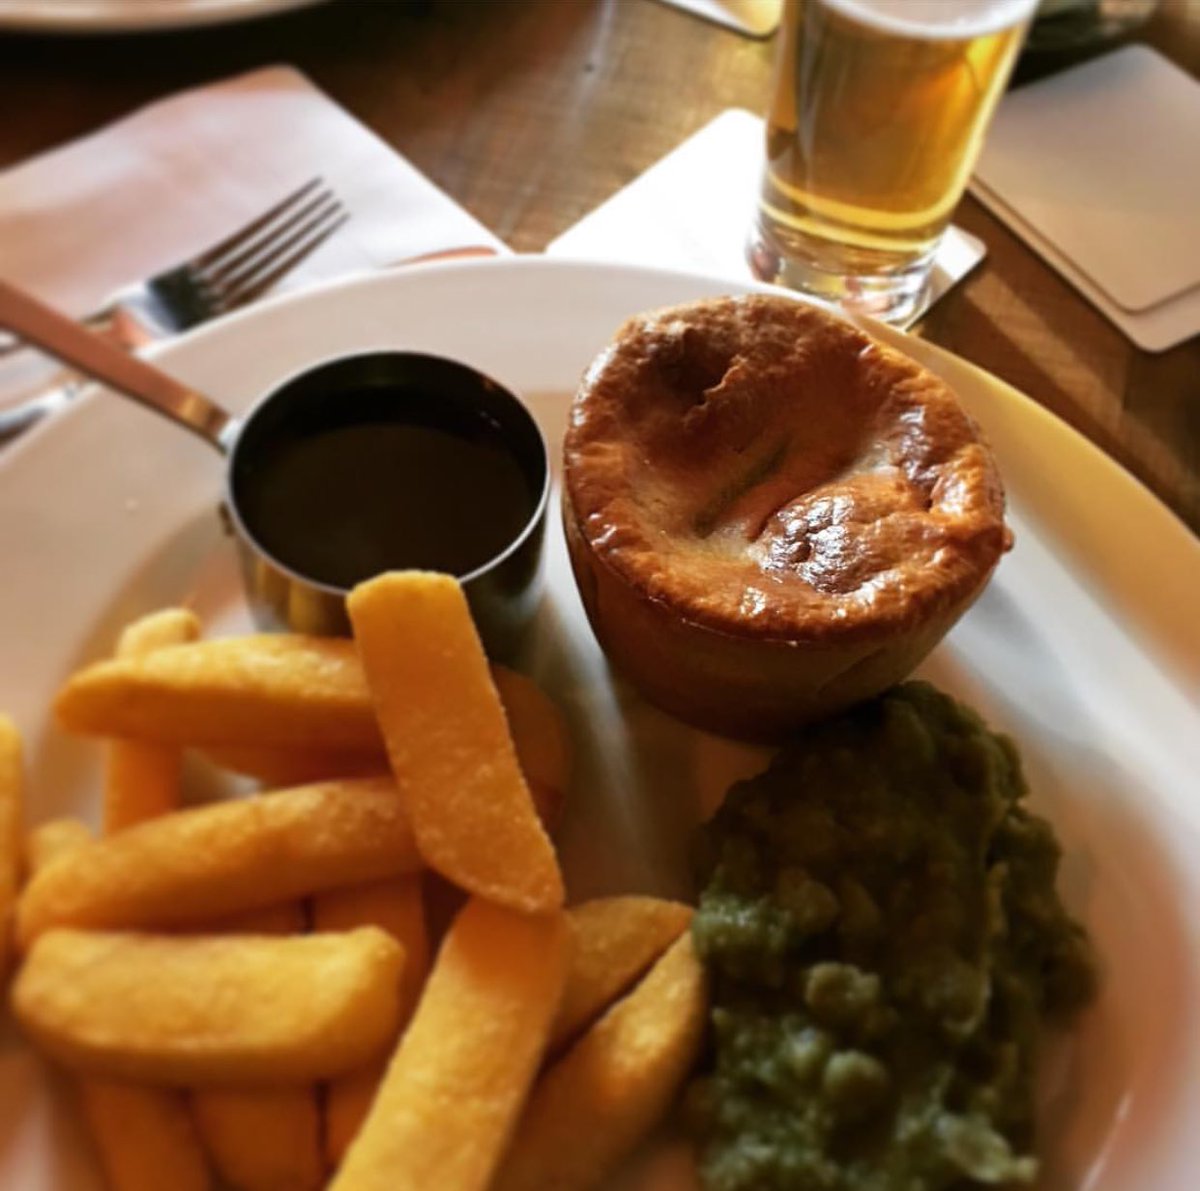 Tuesday night essentials 🍺🍟  

#styal #wilmslow #handforth #publife #pieandpeas #chips #beer #tuesday #food #inspo